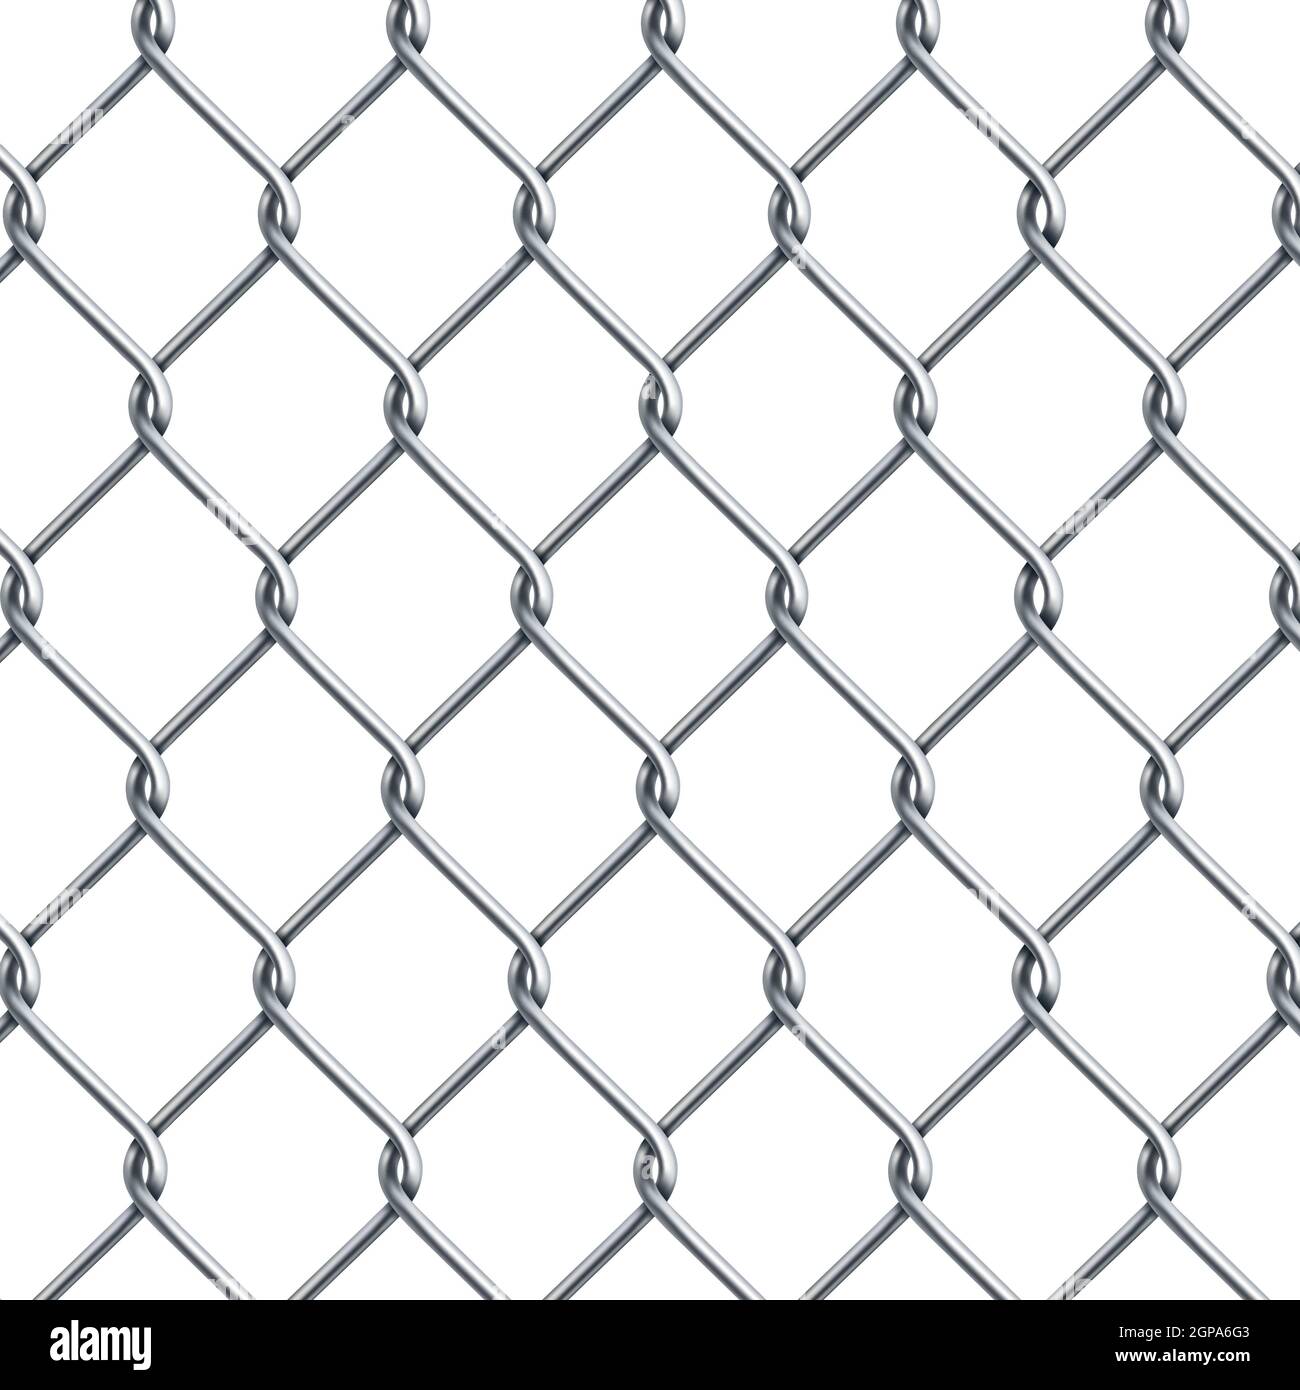 Silver metal mesh chain-link on a white background - Vector illustration Stock Photo